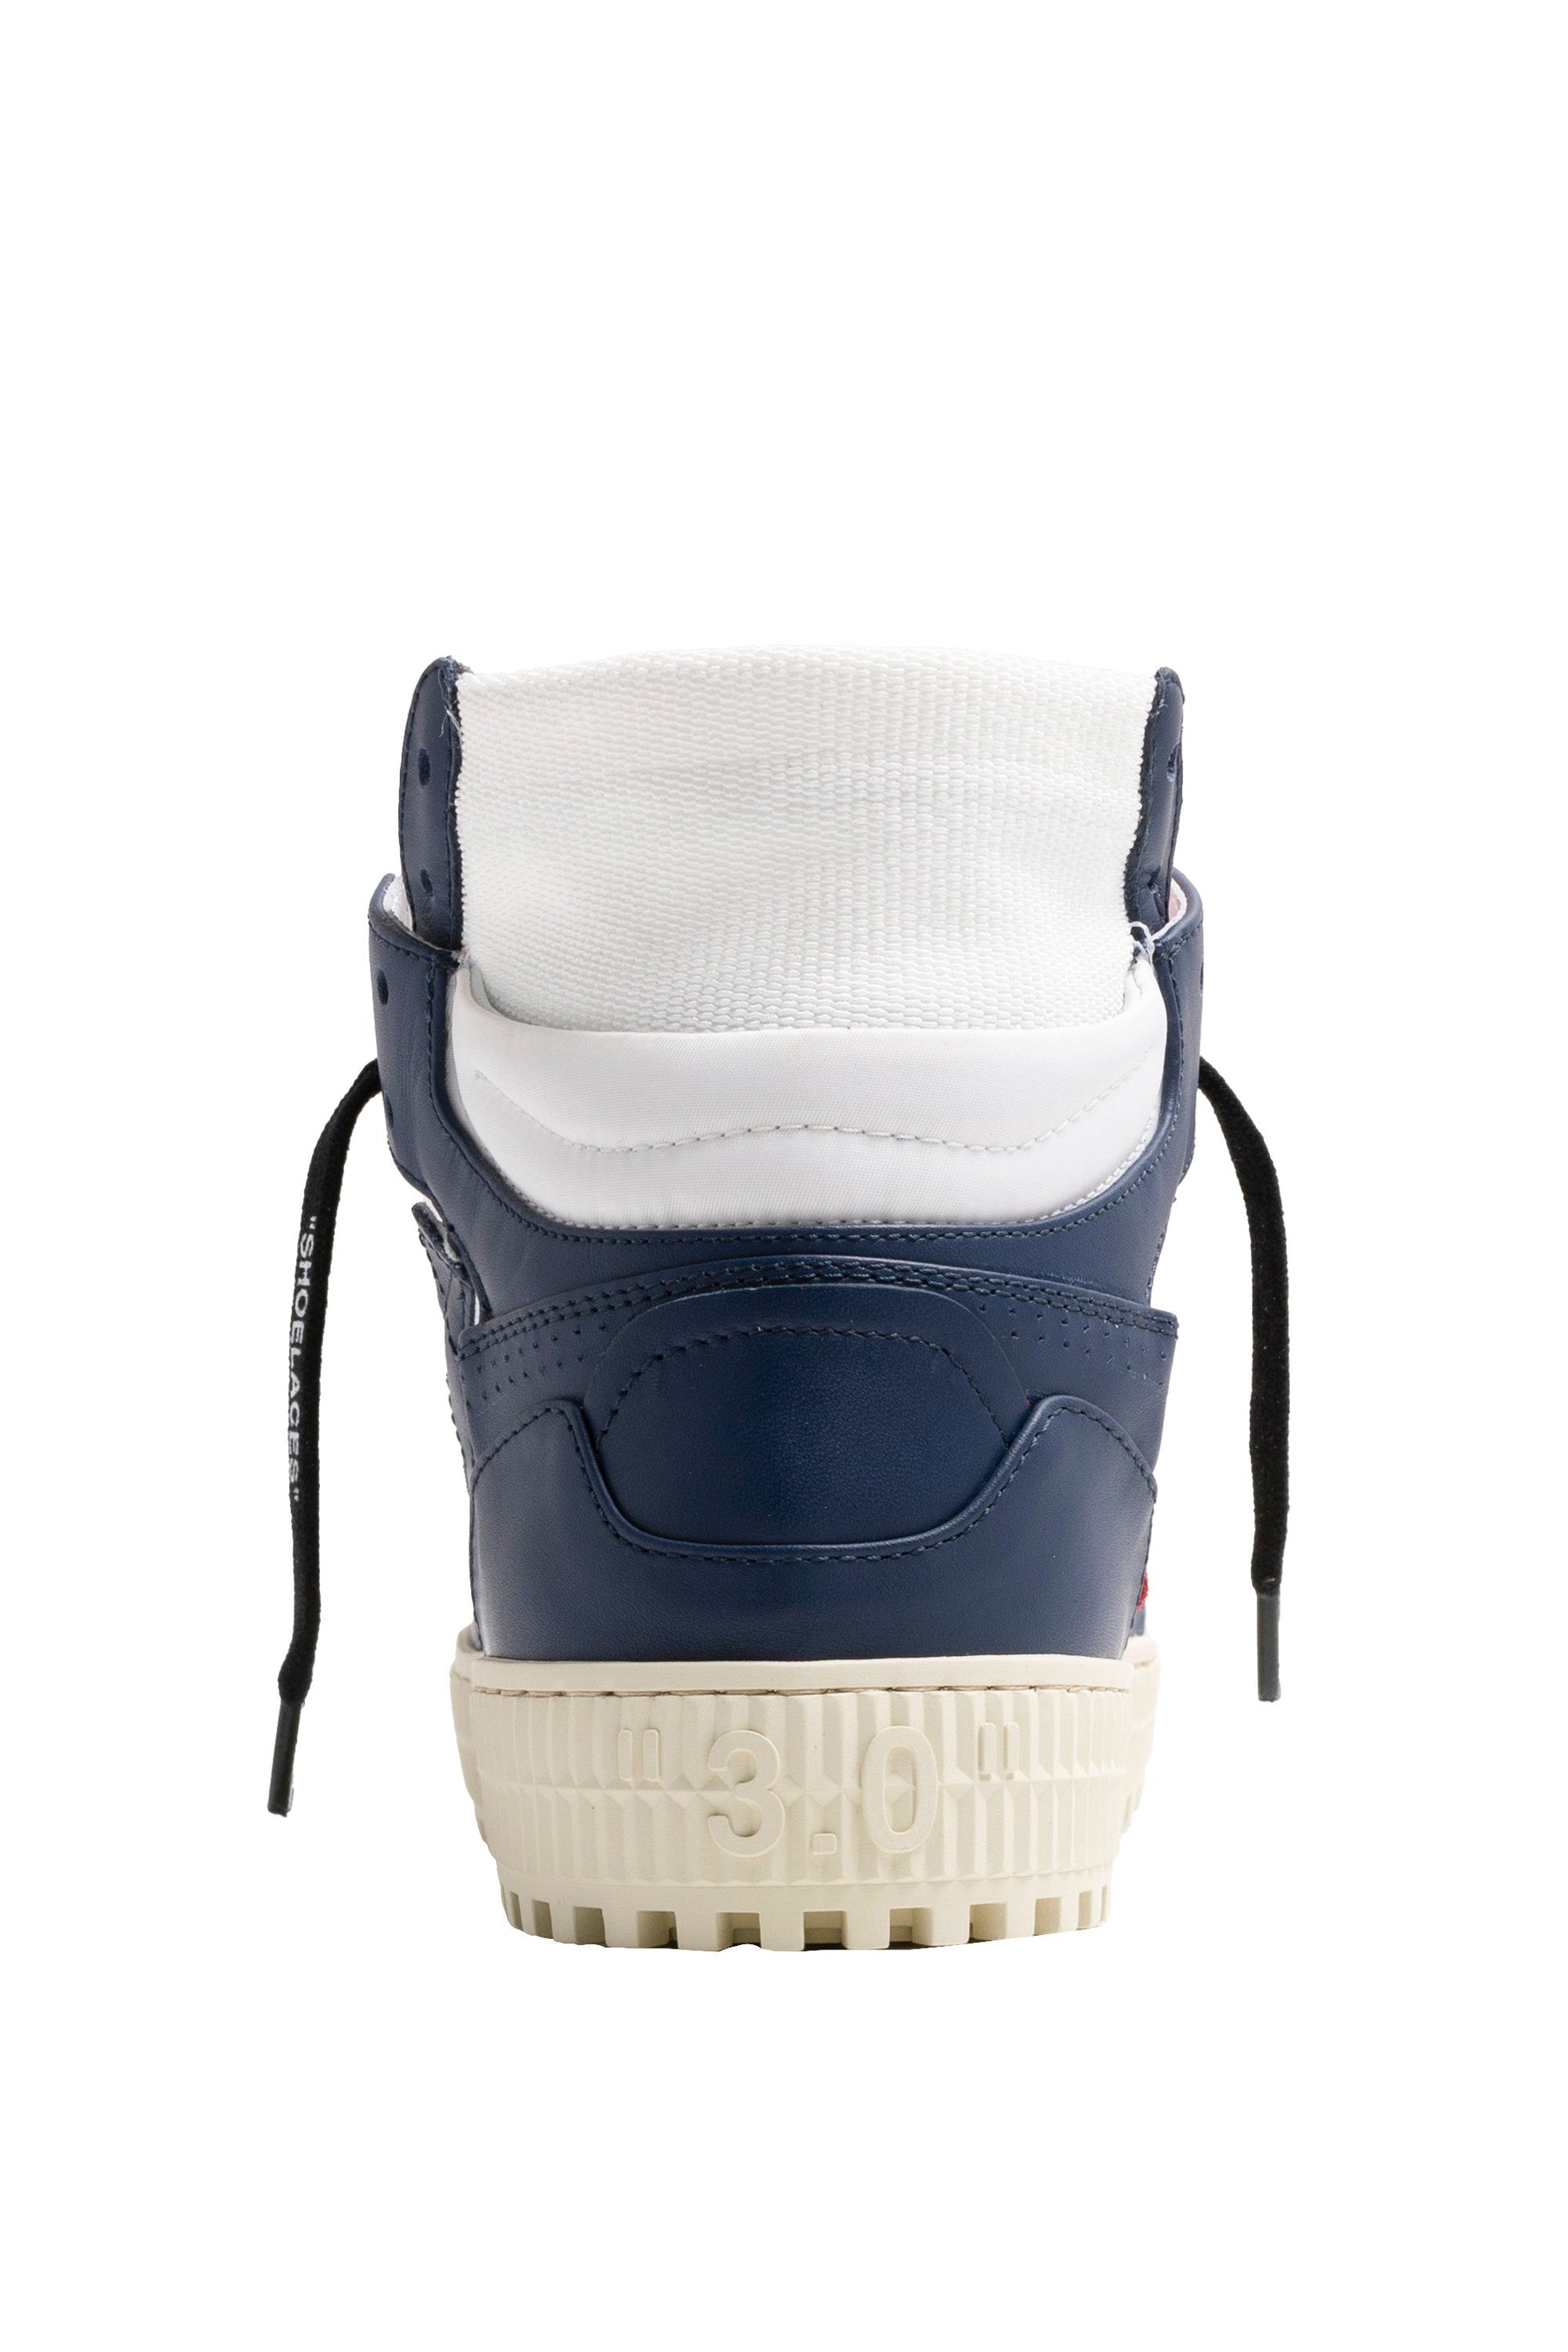 3.0 OFF COURT LEATHER / WHT DBLU